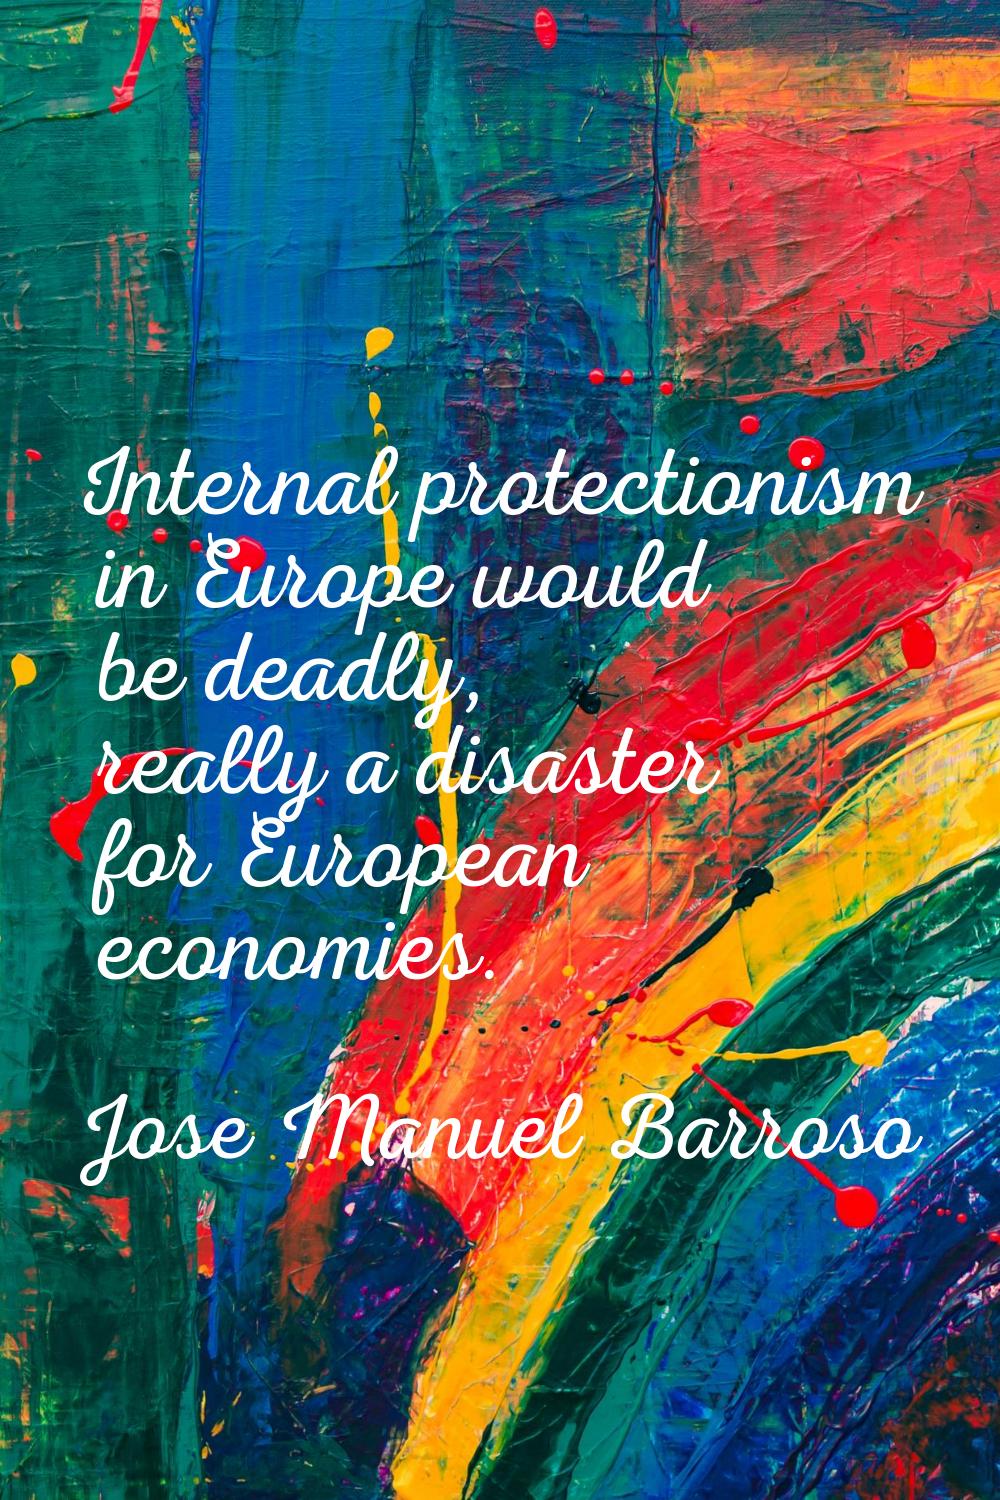 Internal protectionism in Europe would be deadly, really a disaster for European economies.